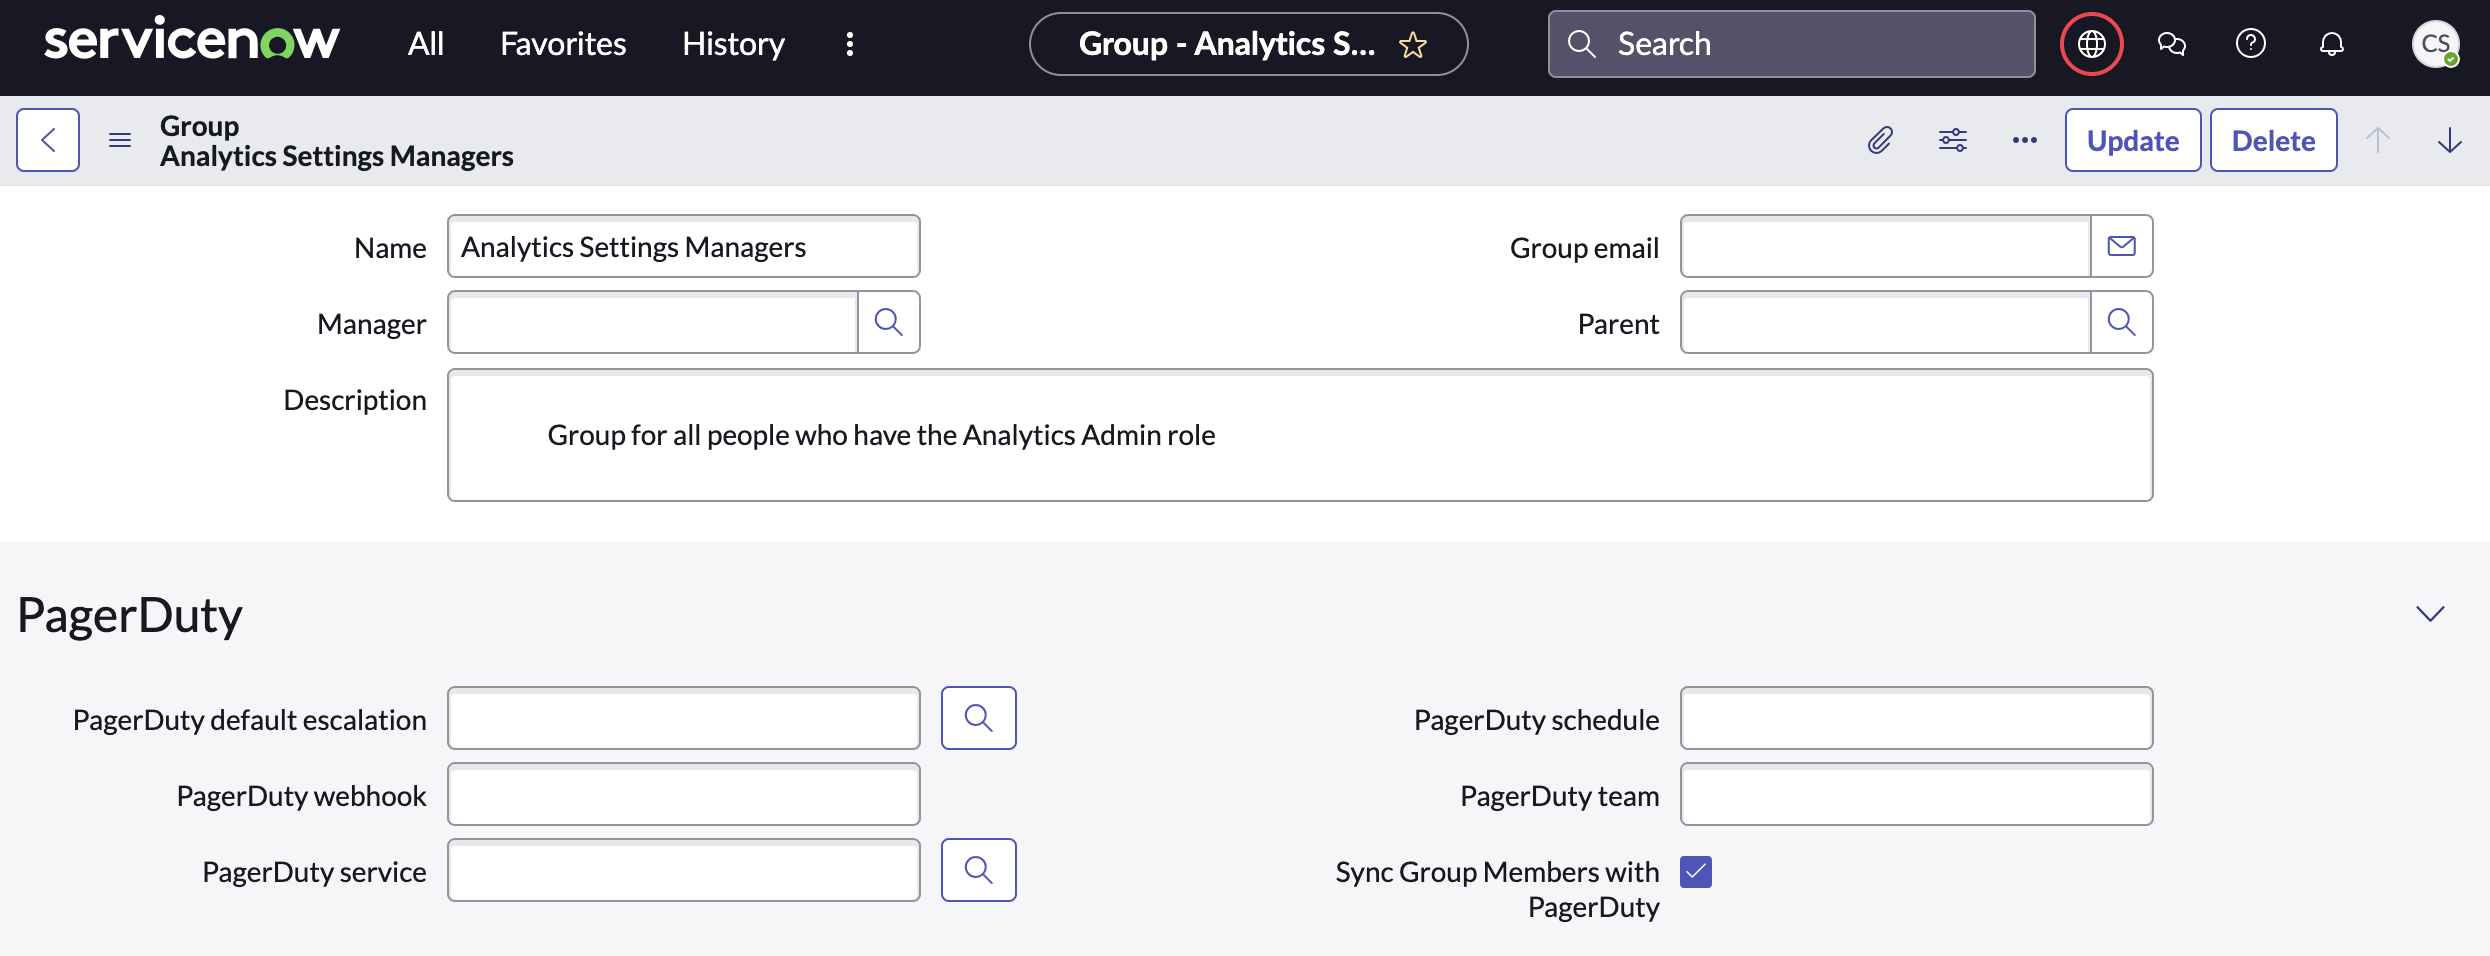 Review settings for "Sync Group Members with PagerDuty"